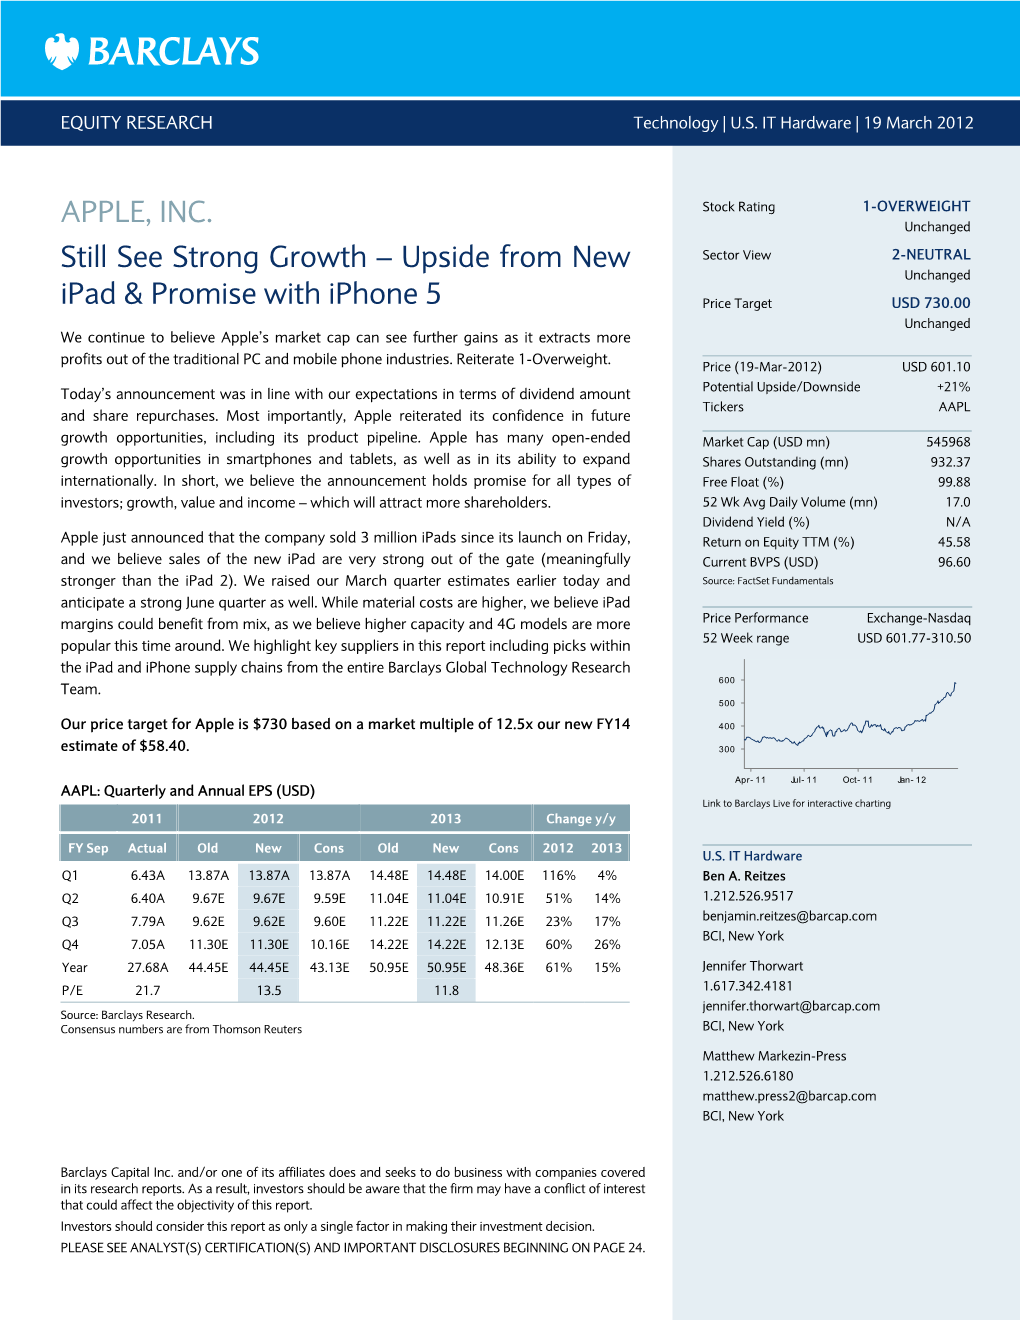 APPLE, INC. Still See Strong Growth – Upside from New Ipad & Promise